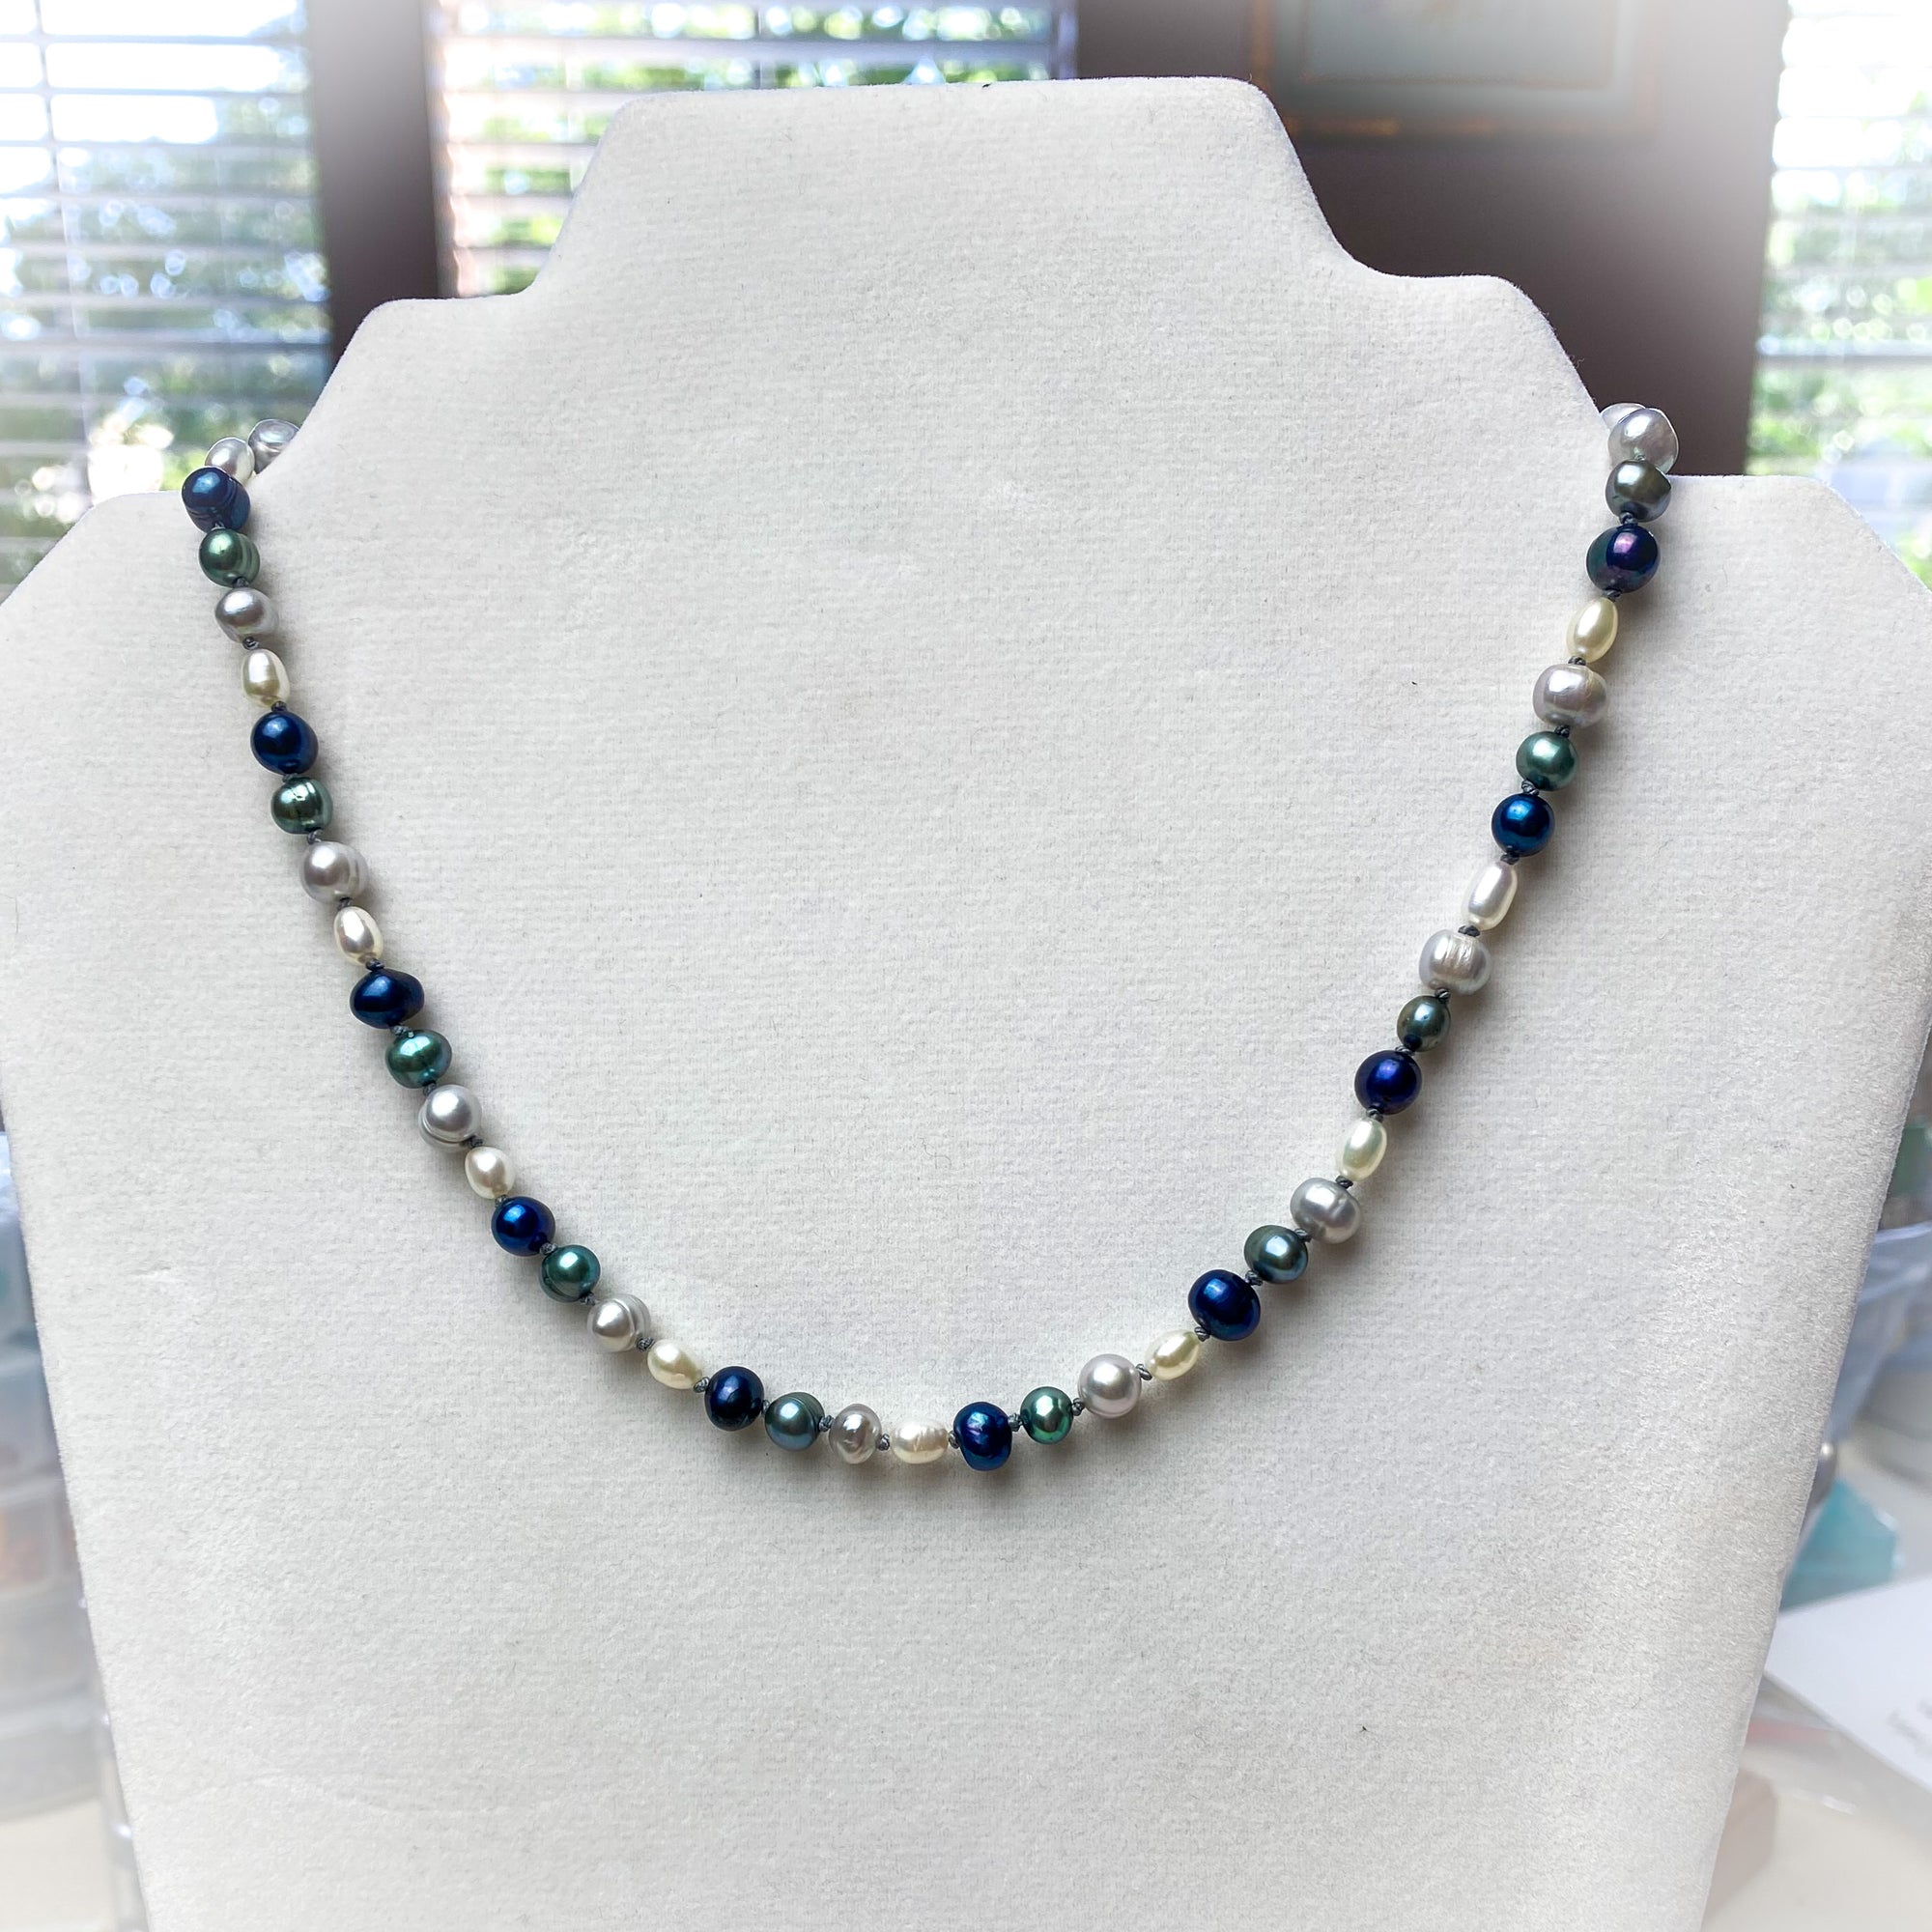 Buy Navy Pearl Necklace, Baroque Pearl Necklace, 6mm Blue Pearl Necklace,  Statement Necklace, Bridesmaid Necklace, Real Freshwater Pearls Online in  India - Etsy